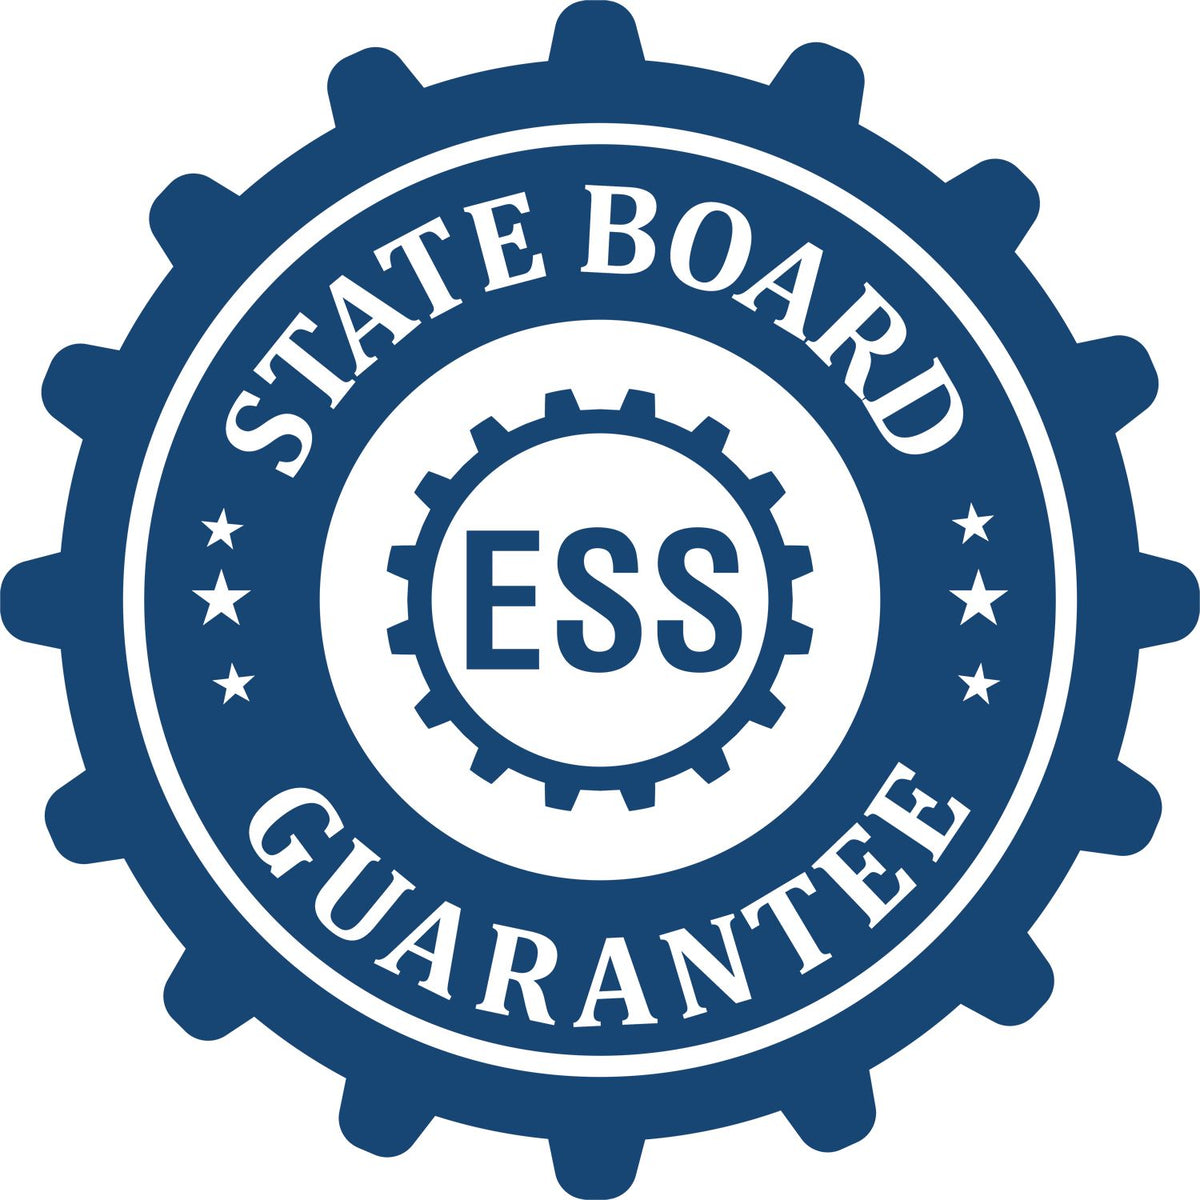 An emblem in a gear shape illustrating a state board guarantee for the Nevada Geologist Desk Seal